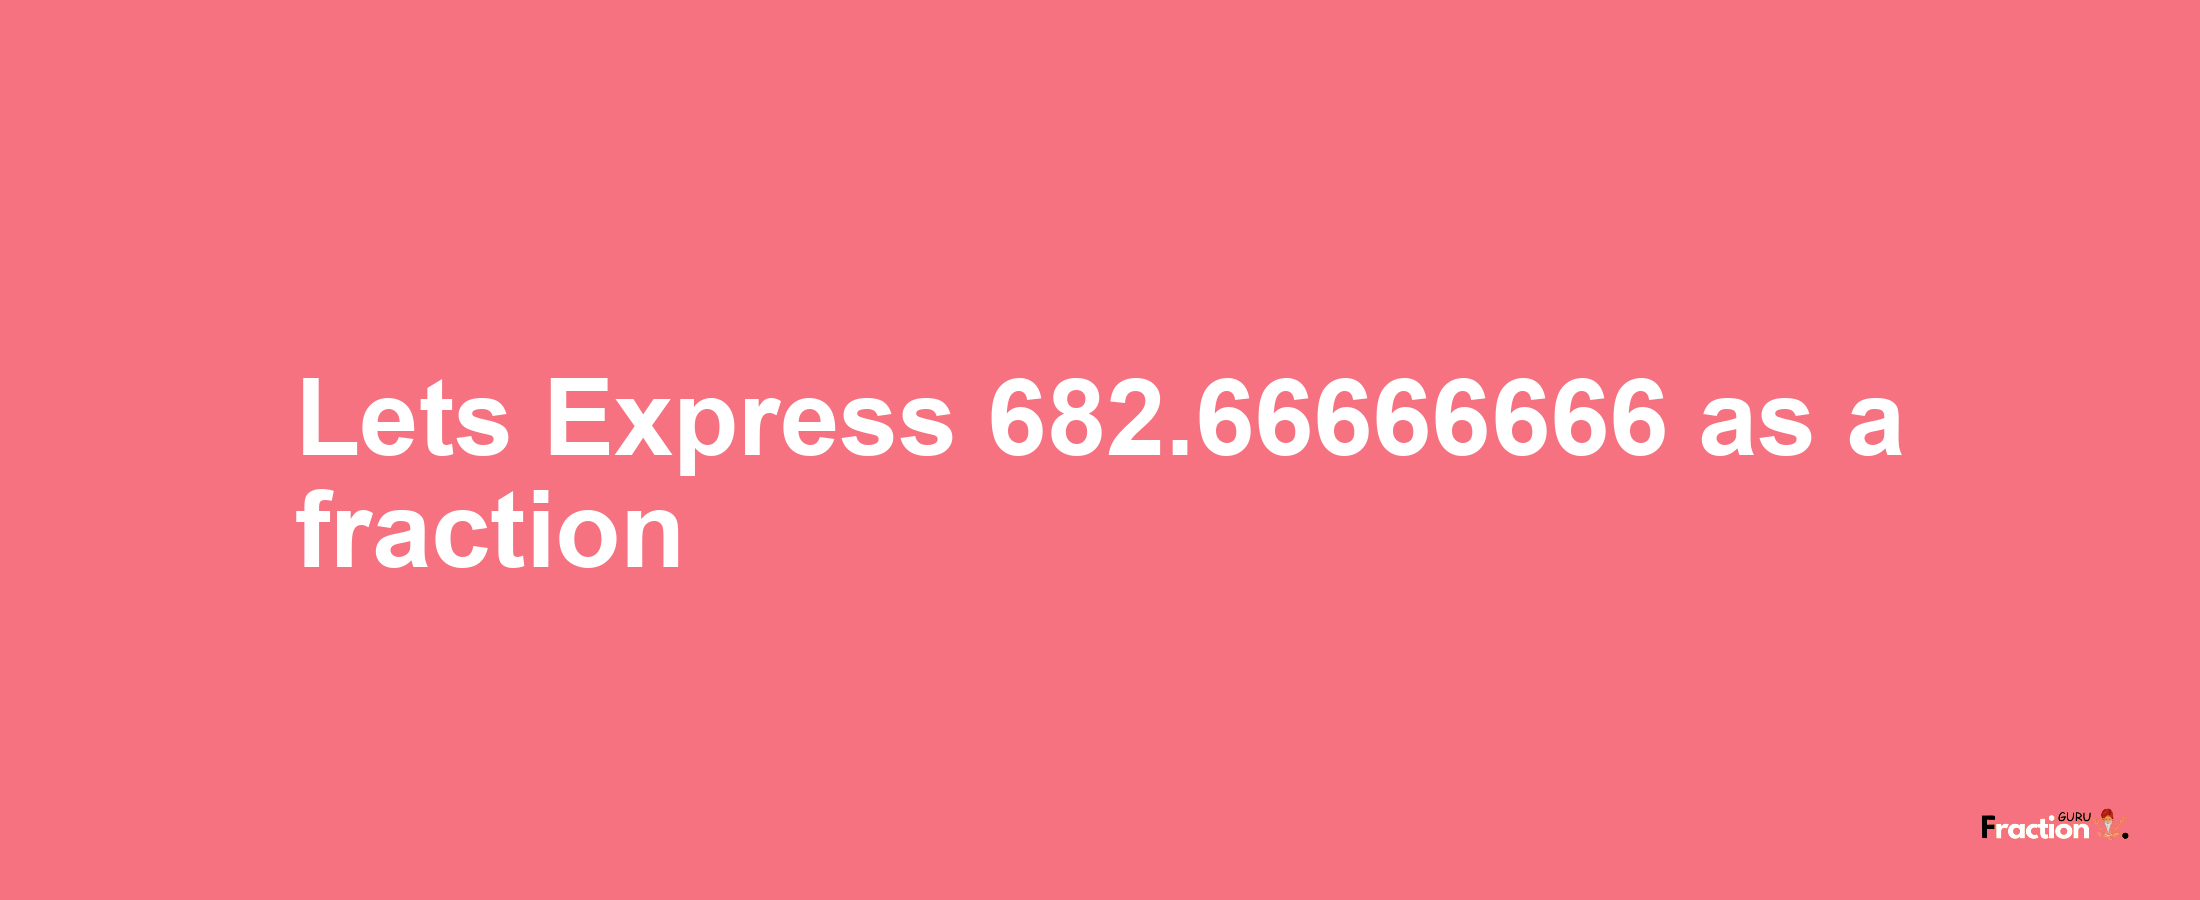 Lets Express 682.66666666 as afraction